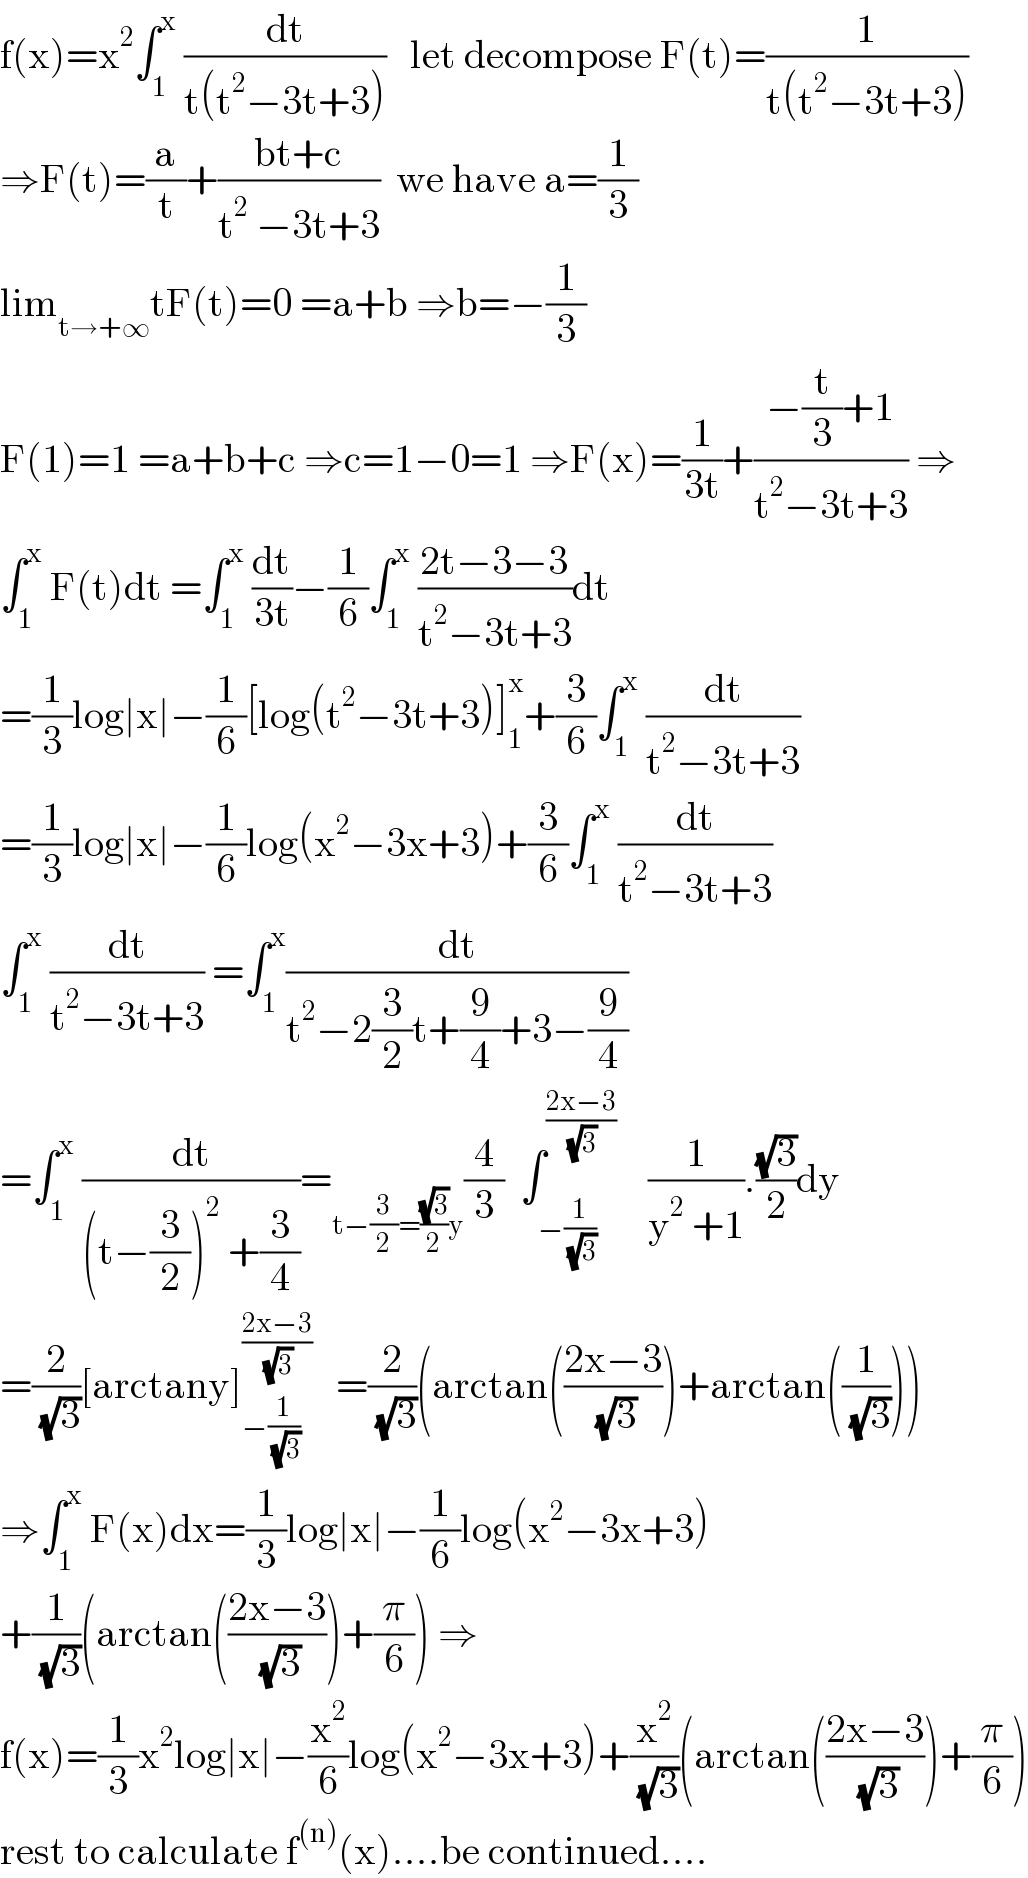 f(x)=x^2 ∫_1 ^x  (dt/(t(t^2 −3t+3)))   let decompose F(t)=(1/(t(t^2 −3t+3)))  ⇒F(t)=(a/t)+((bt+c)/(t^2  −3t+3))  we have a=(1/3)  lim_(t→+∞) tF(t)=0 =a+b ⇒b=−(1/3)  F(1)=1 =a+b+c ⇒c=1−0=1 ⇒F(x)=(1/(3t))+((−(t/3)+1)/(t^2 −3t+3)) ⇒  ∫_1 ^x  F(t)dt =∫_1 ^x  (dt/(3t))−(1/6)∫_1 ^x  ((2t−3−3)/(t^2 −3t+3))dt  =(1/3)log∣x∣−(1/6)[log(t^2 −3t+3)]_1 ^x +(3/6)∫_1 ^x  (dt/(t^2 −3t+3))  =(1/3)log∣x∣−(1/6)log(x^2 −3x+3)+(3/6)∫_1 ^x  (dt/(t^2 −3t+3))  ∫_1 ^x  (dt/(t^2 −3t+3)) =∫_1 ^x (dt/(t^2 −2(3/2)t+(9/4)+3−(9/4)))  =∫_1 ^x  (dt/((t−(3/2))^2  +(3/4)))=_(t−(3/2)=((√3)/2)y) (4/3)  ∫_(−(1/( (√3)))) ^((2x−3)/( (√3)))     (1/(y^2  +1)).((√3)/2)dy  =(2/( (√3)))[arctany]_(−(1/( (√3)))) ^((2x−3)/( (√3)))    =(2/( (√3)))(arctan(((2x−3)/( (√3))))+arctan((1/( (√3)))))  ⇒∫_1 ^x  F(x)dx=(1/3)log∣x∣−(1/6)log(x^2 −3x+3)  +(1/( (√3)))(arctan(((2x−3)/( (√3))))+(π/6)) ⇒  f(x)=(1/3)x^2 log∣x∣−(x^2 /6)log(x^2 −3x+3)+(x^2 /( (√3)))(arctan(((2x−3)/( (√3))))+(π/6))  rest to calculate f^((n)) (x)....be continued....  